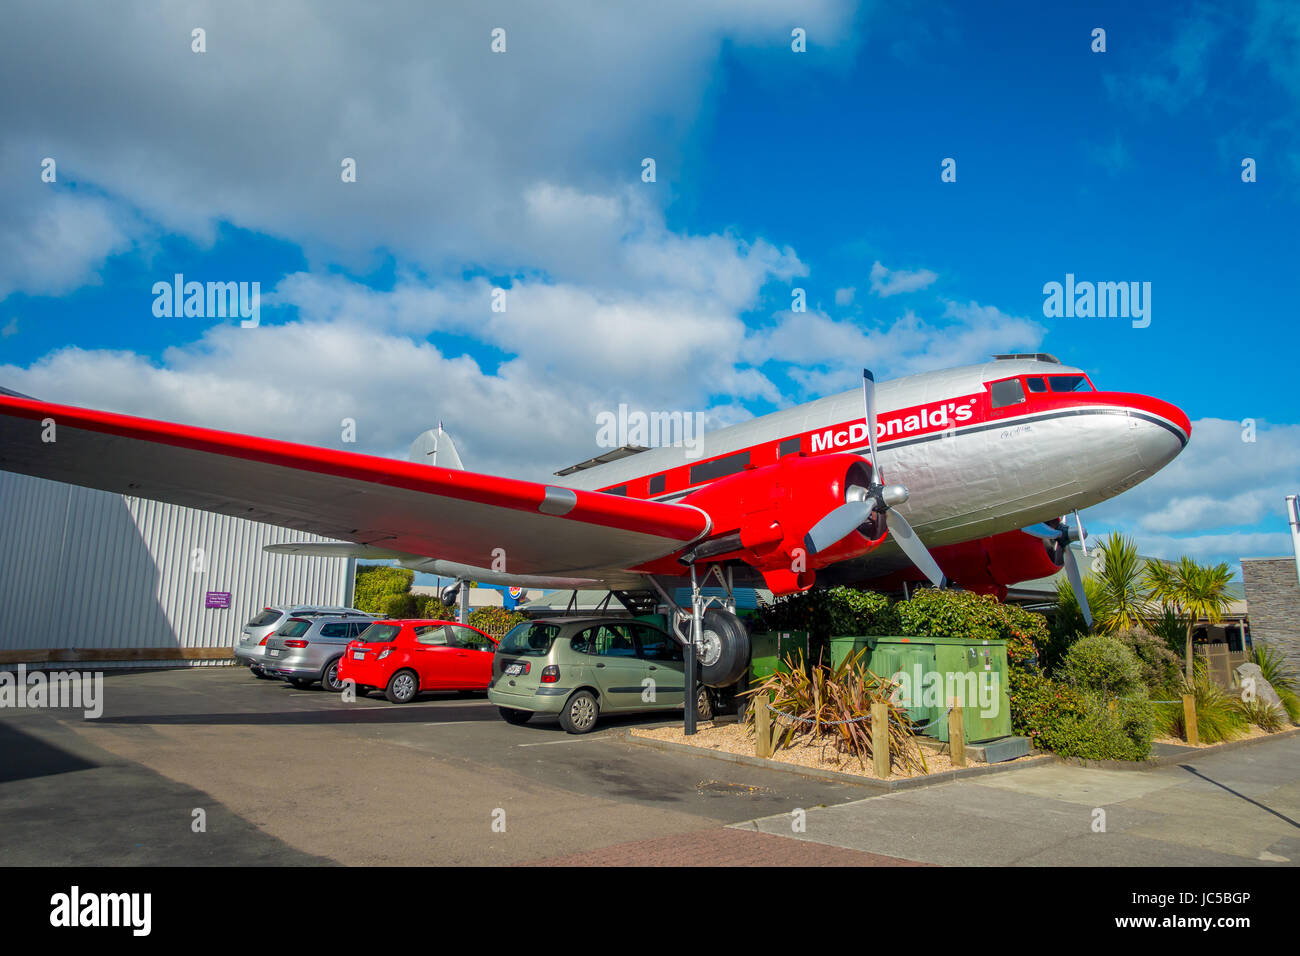 NORTH ISLAND, NEW ZEALAND- MAY 18, 2017: Amazing DC3 plane as part of the McDonald's which is located at Taupo,New Zealand.T, and it is 10 coolest McD Stock Photo